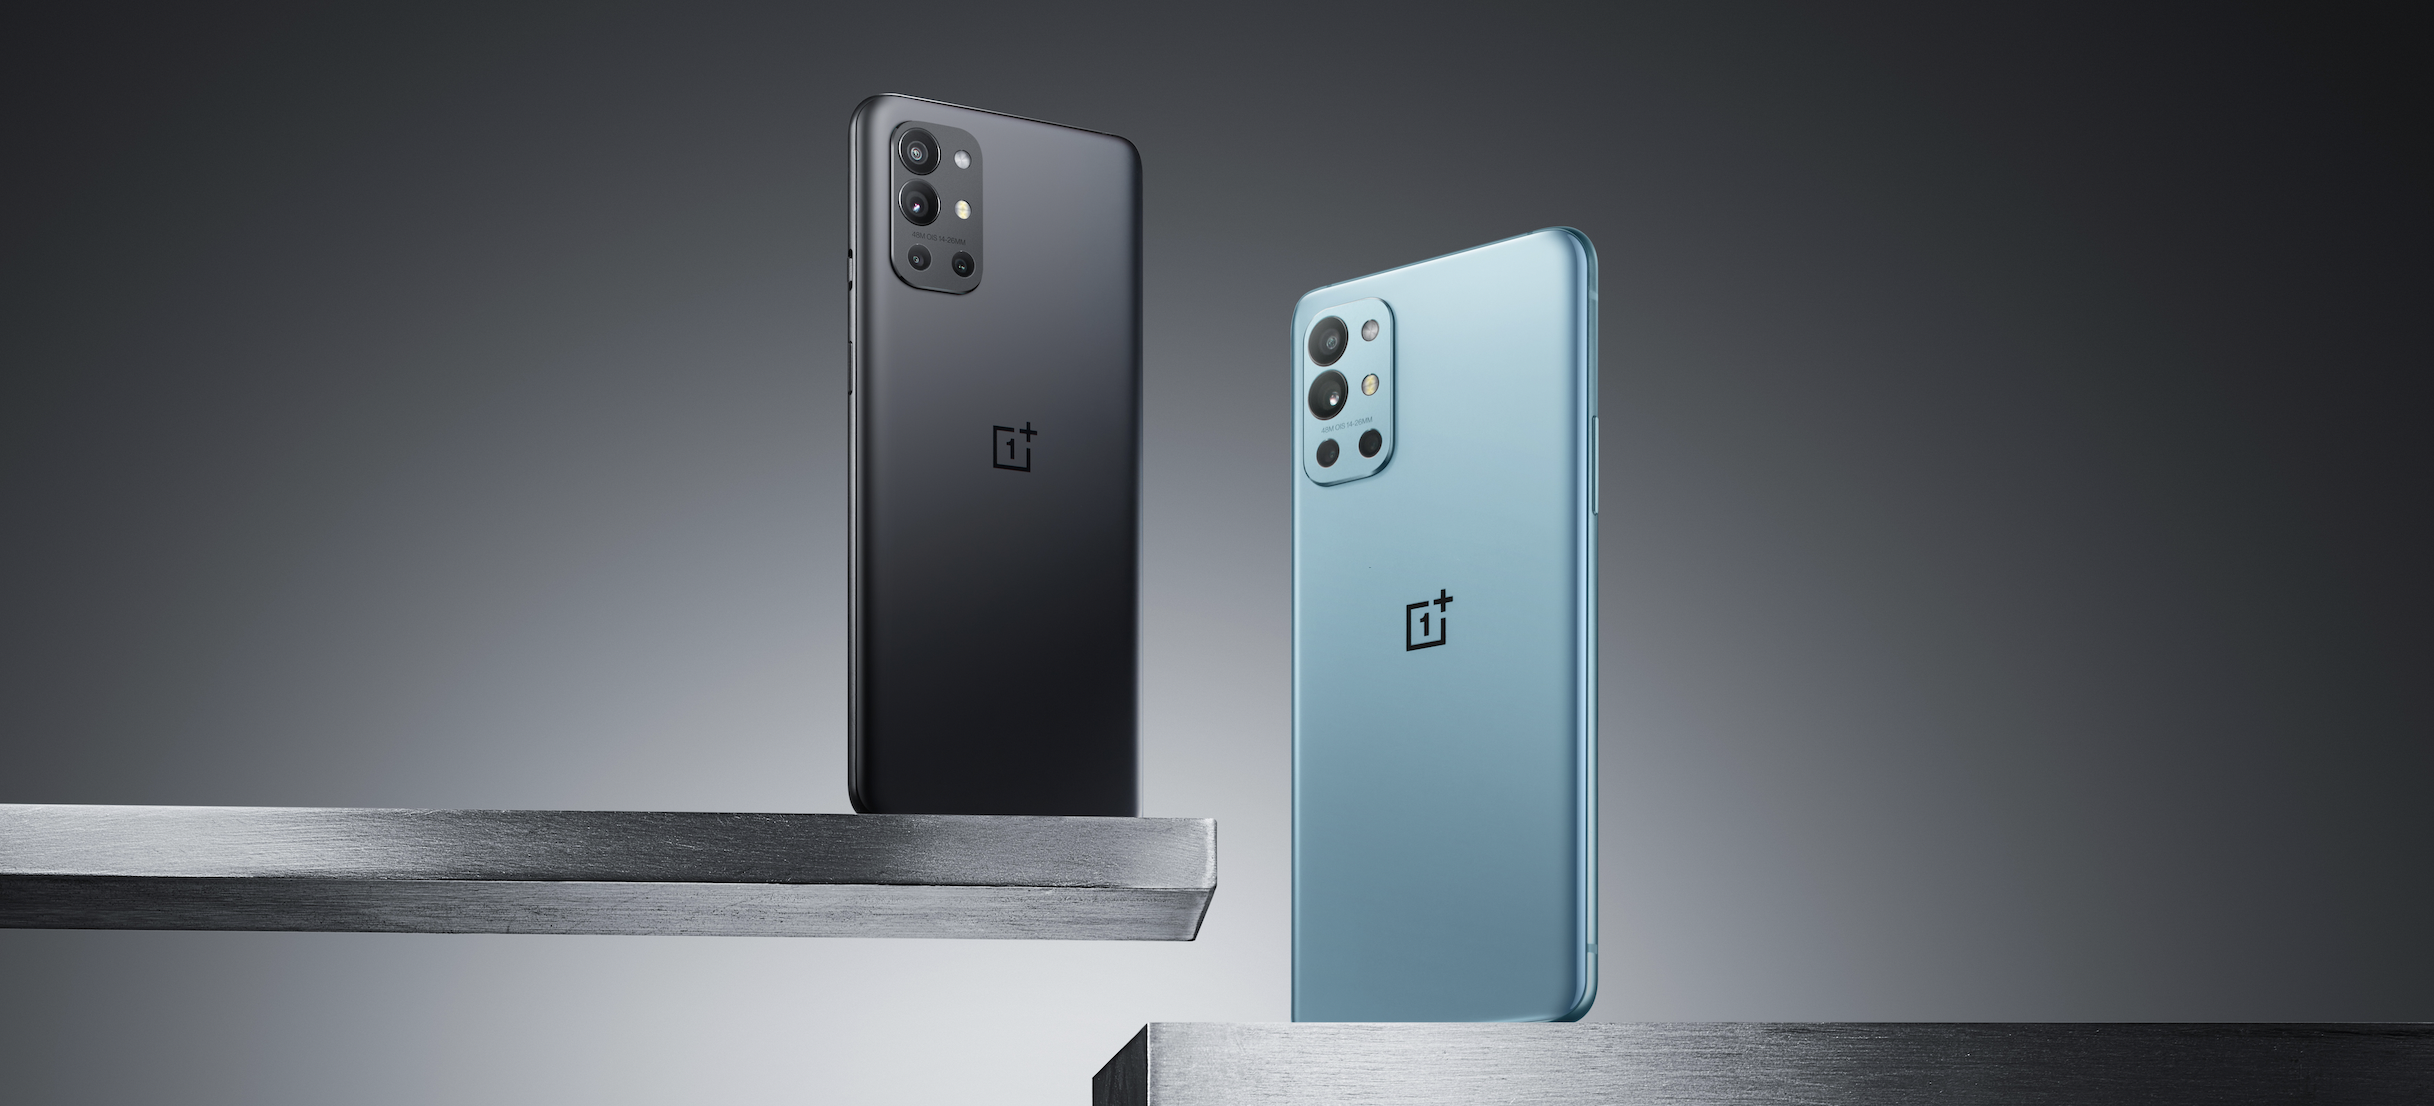 OnePlus 9R Launches in China with Snapdragon 870, 120Hz Display